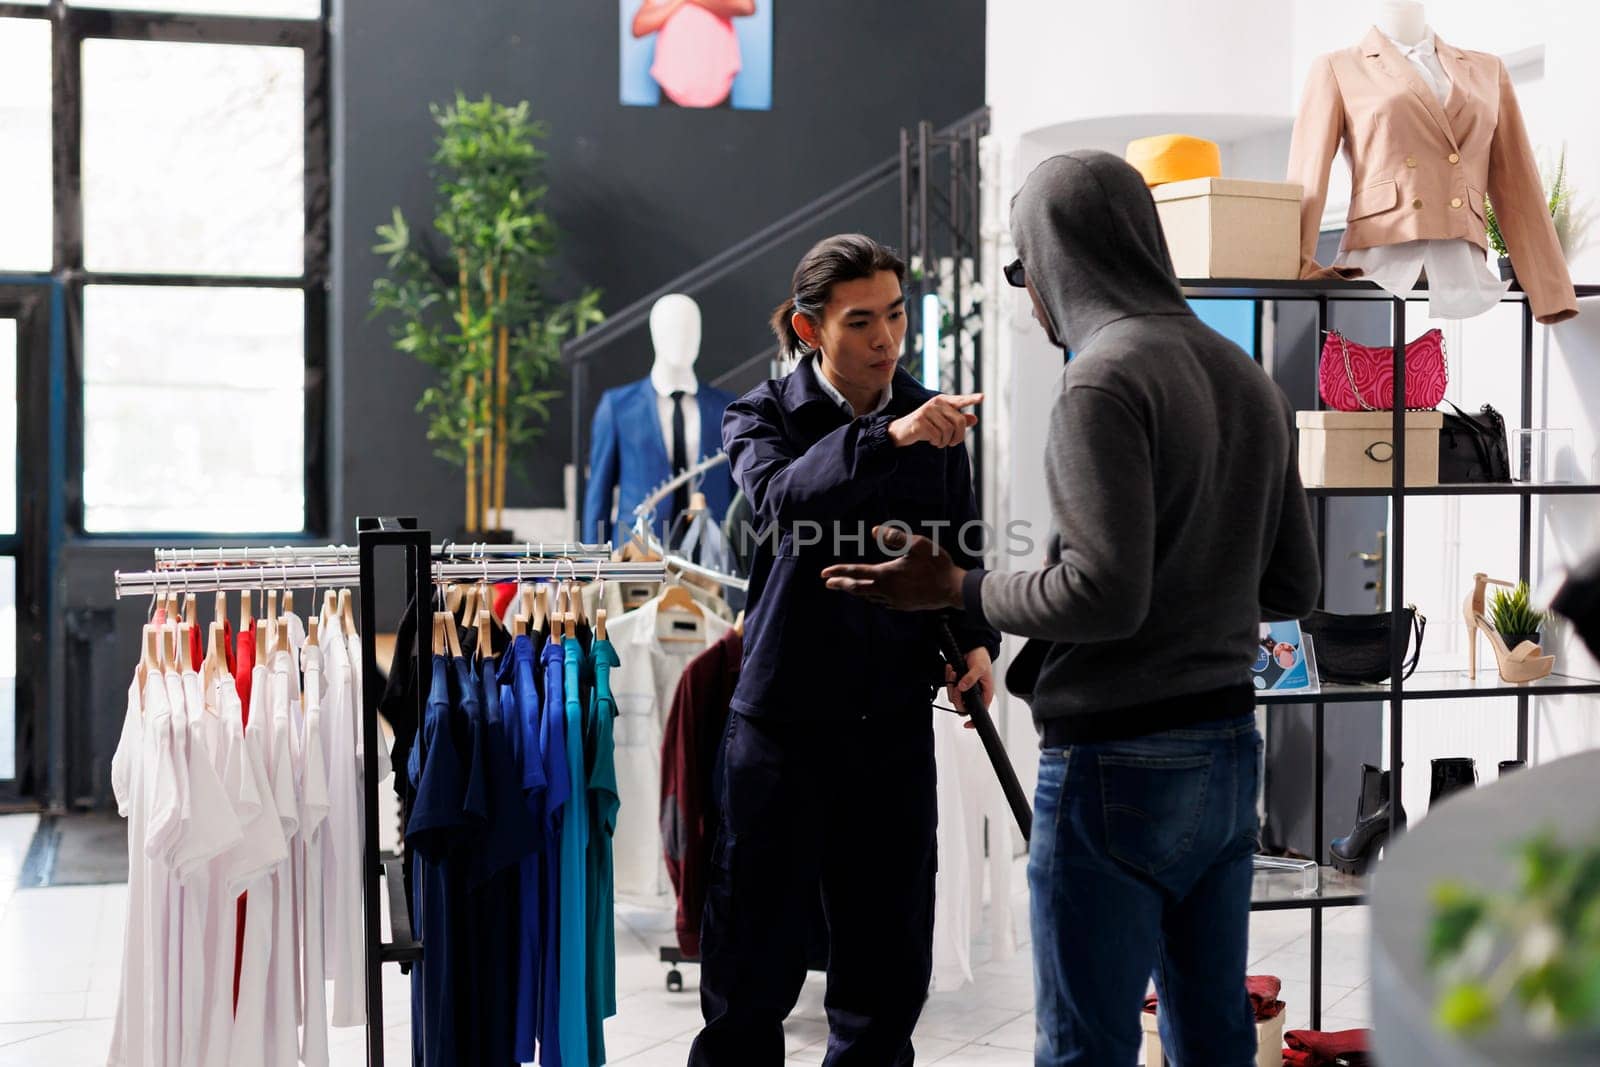 Thief was caugh robbing store by worker by DCStudio